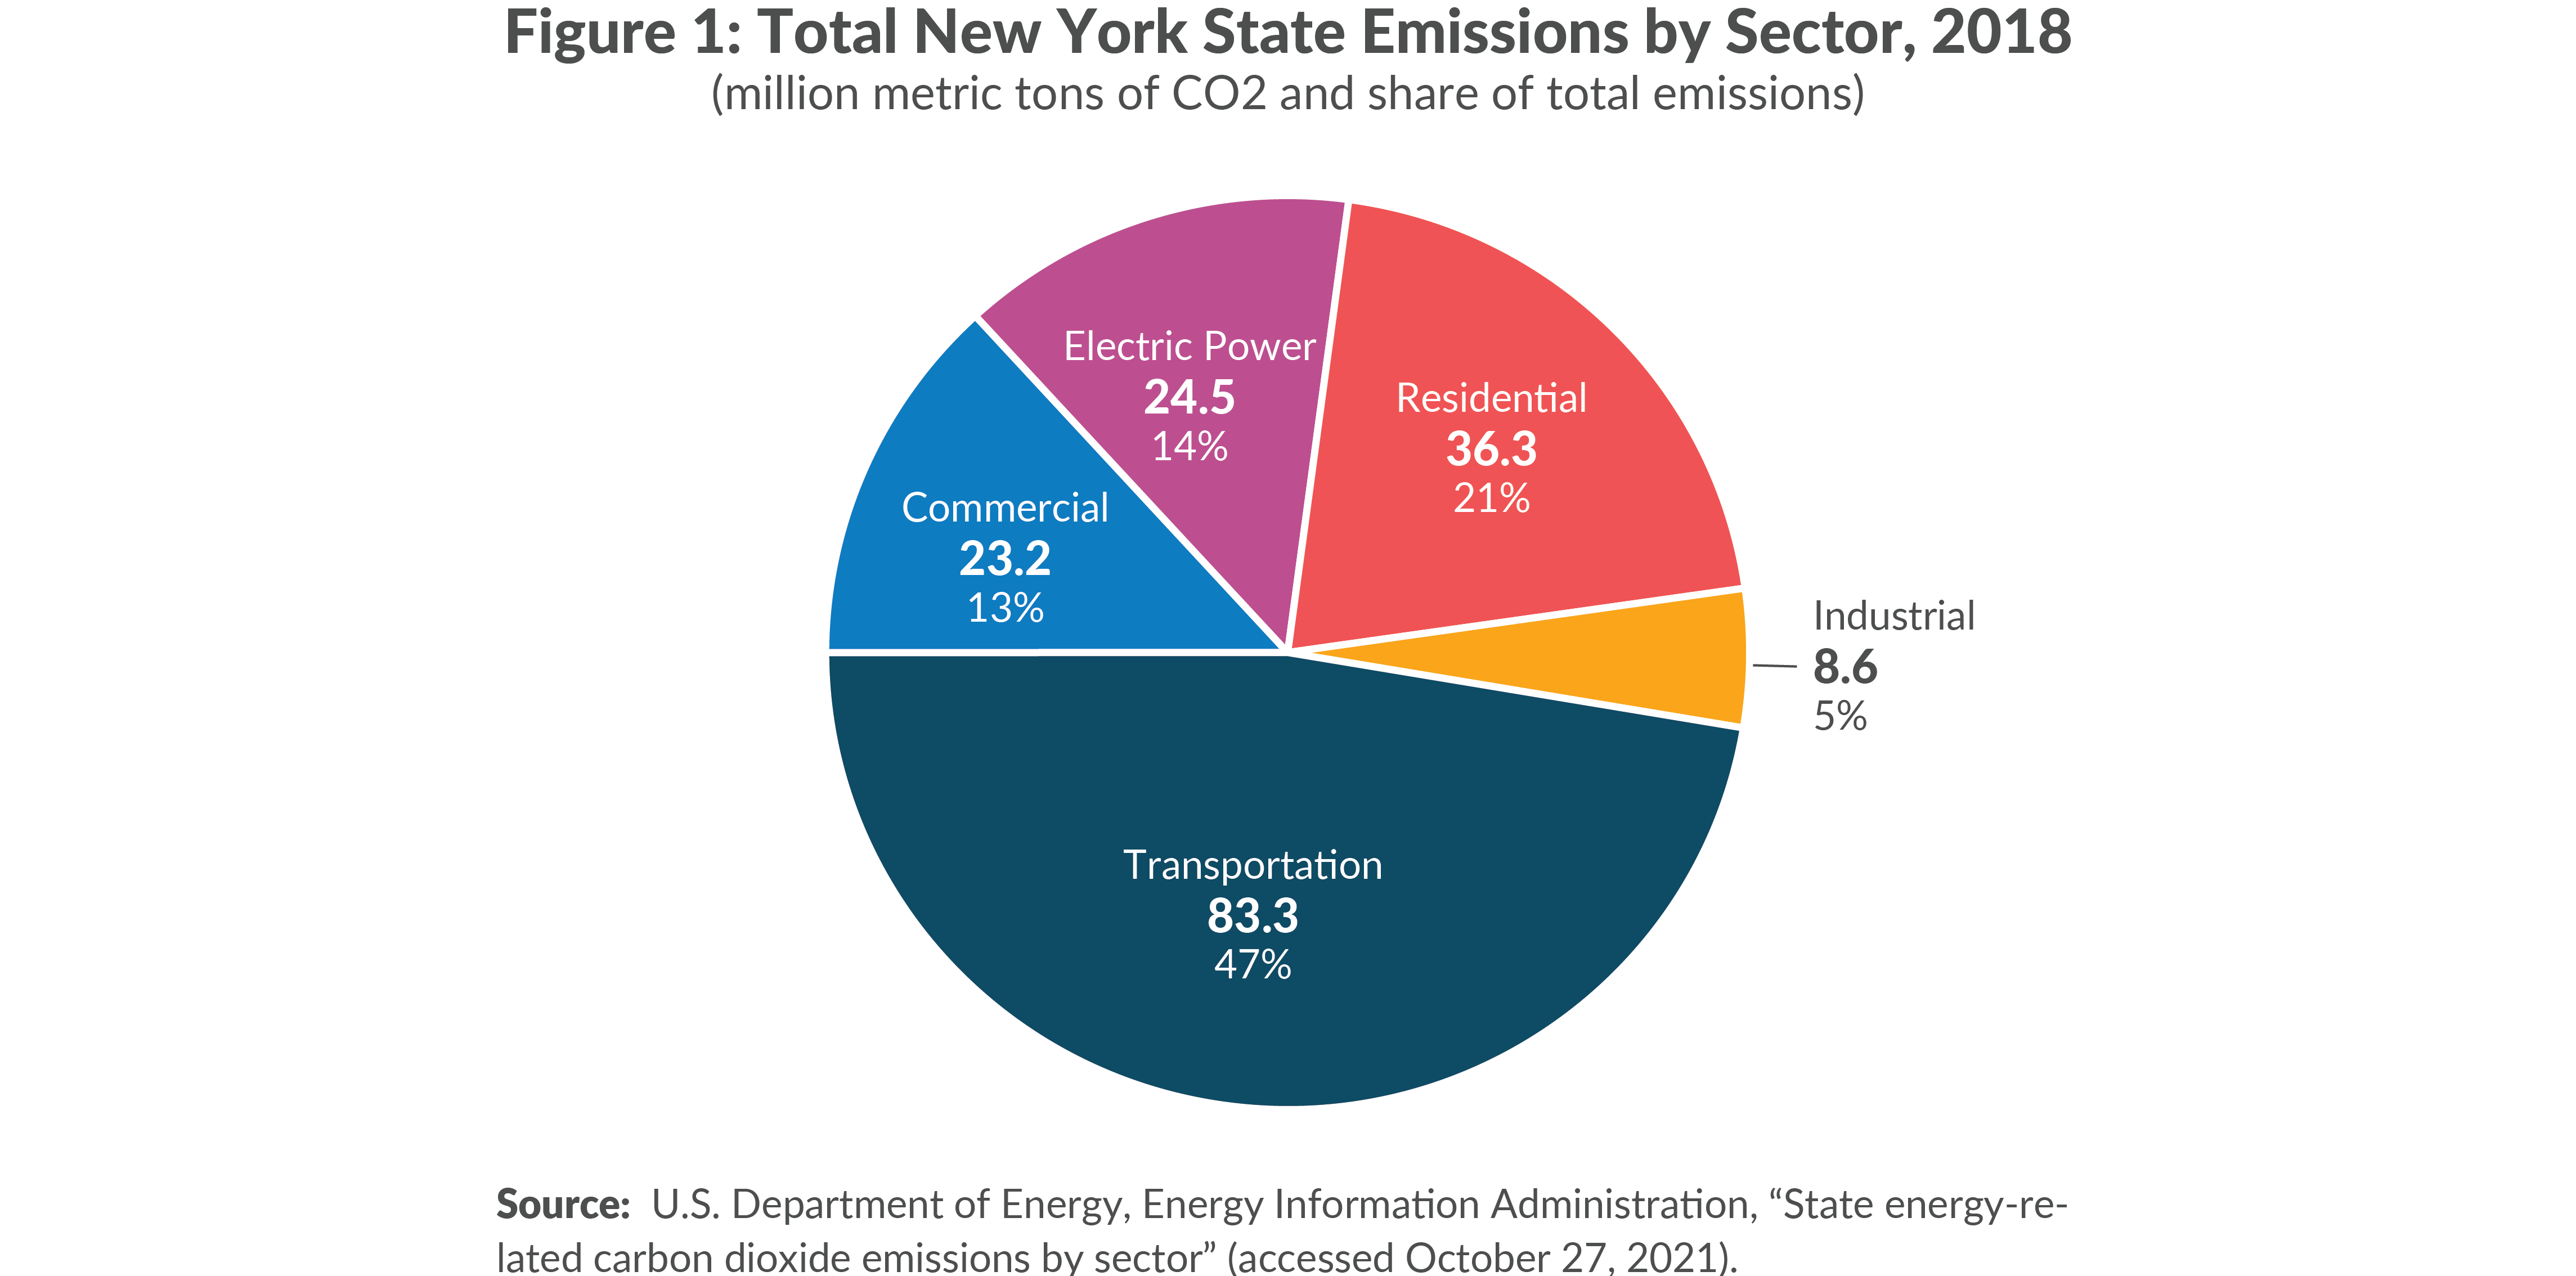 Figure 1: Total New York State Emissions by Sector, 2018